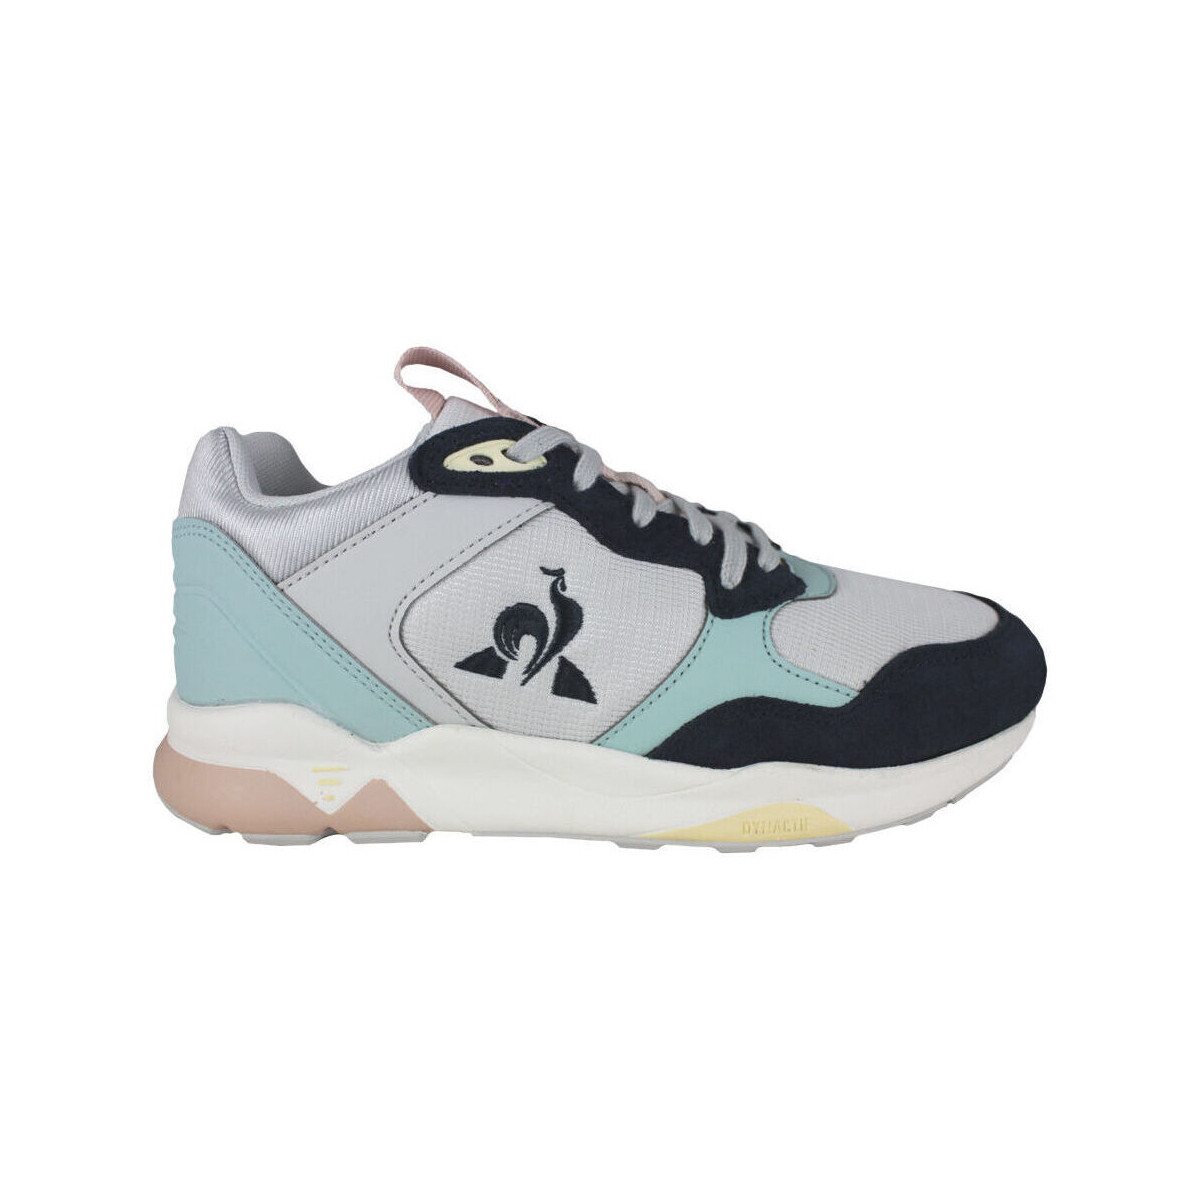 Sneakers Le Coq Sportif Lcs r500 w pop LCS R500 GALET/PASTEL TURQUOISE